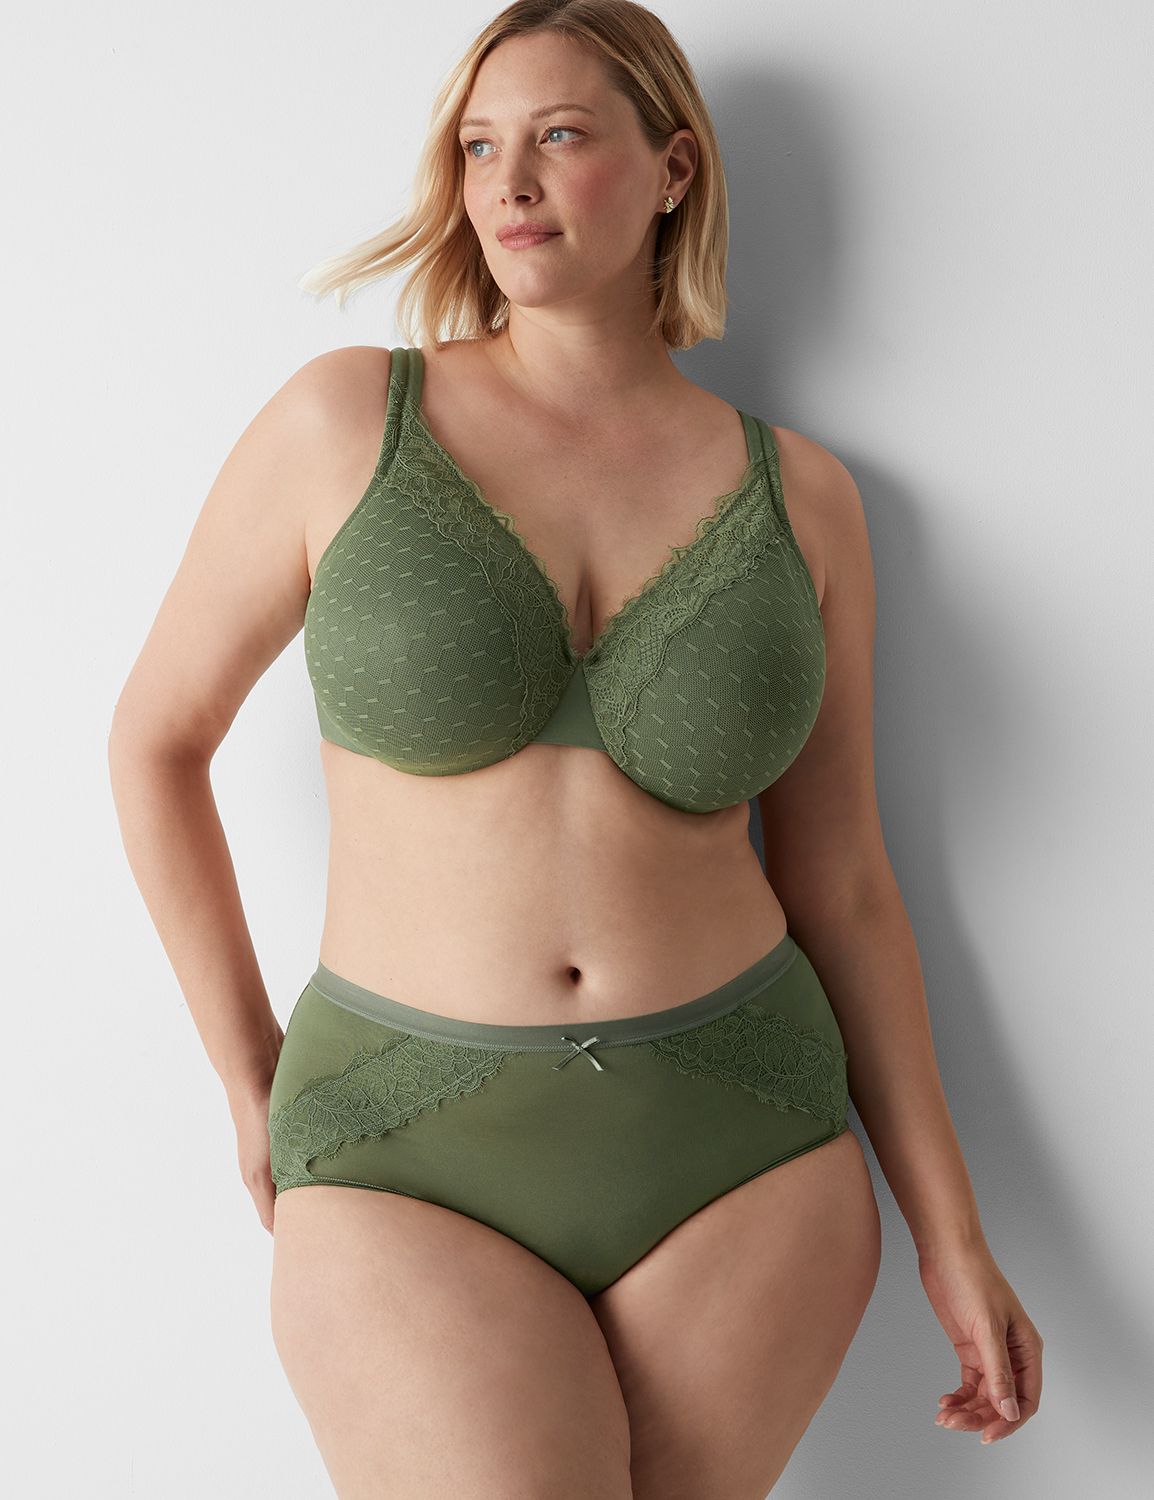 Labor Day deals 2023: Save 40% at Lane Bryant - Reviewed